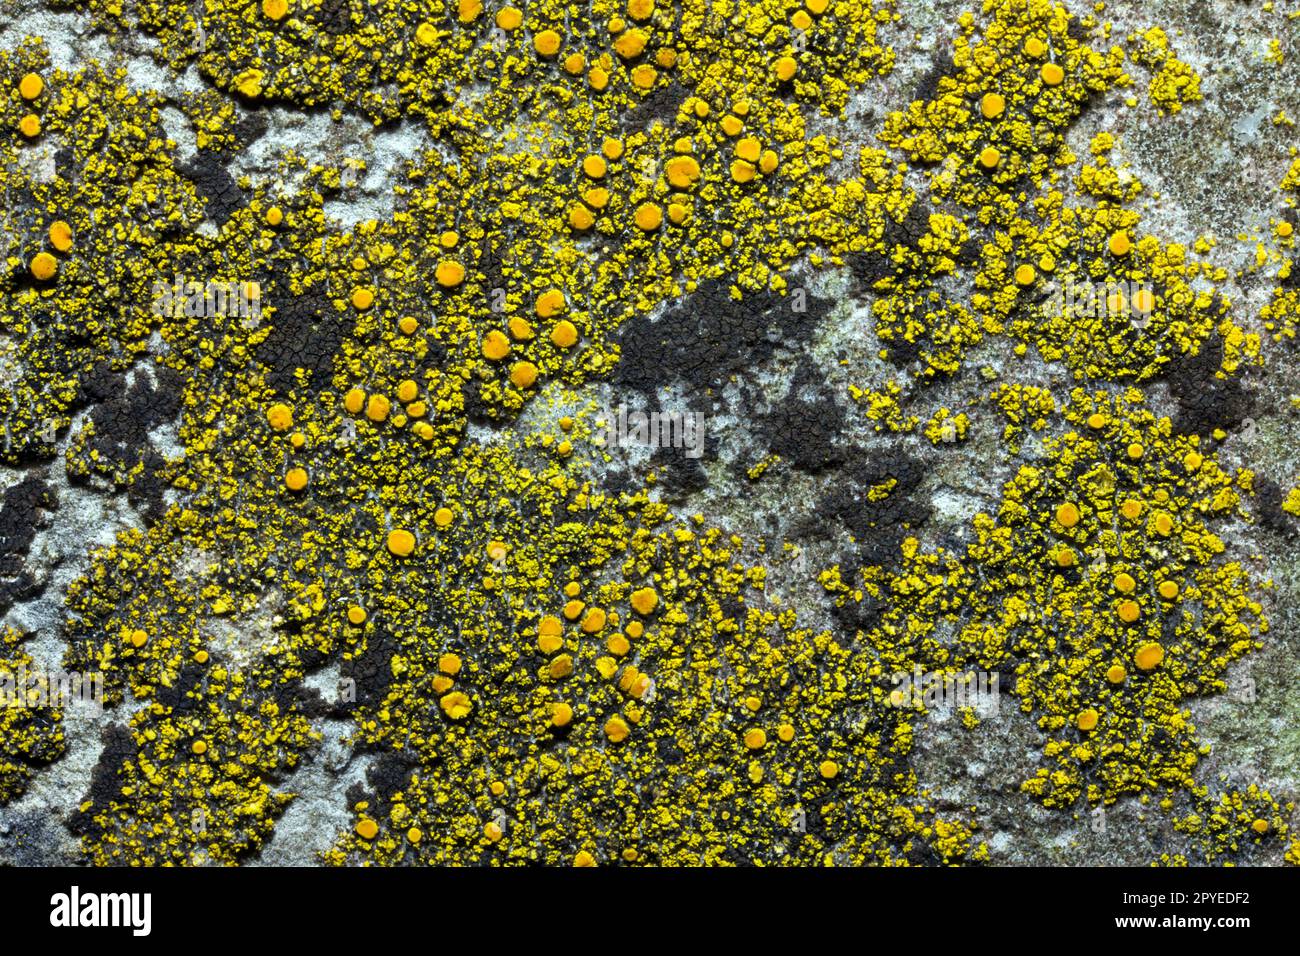 Caloplaca citrina is a crustose lichen common on walls, mortar and calcareous rocks. It has a global distribution. Stock Photo